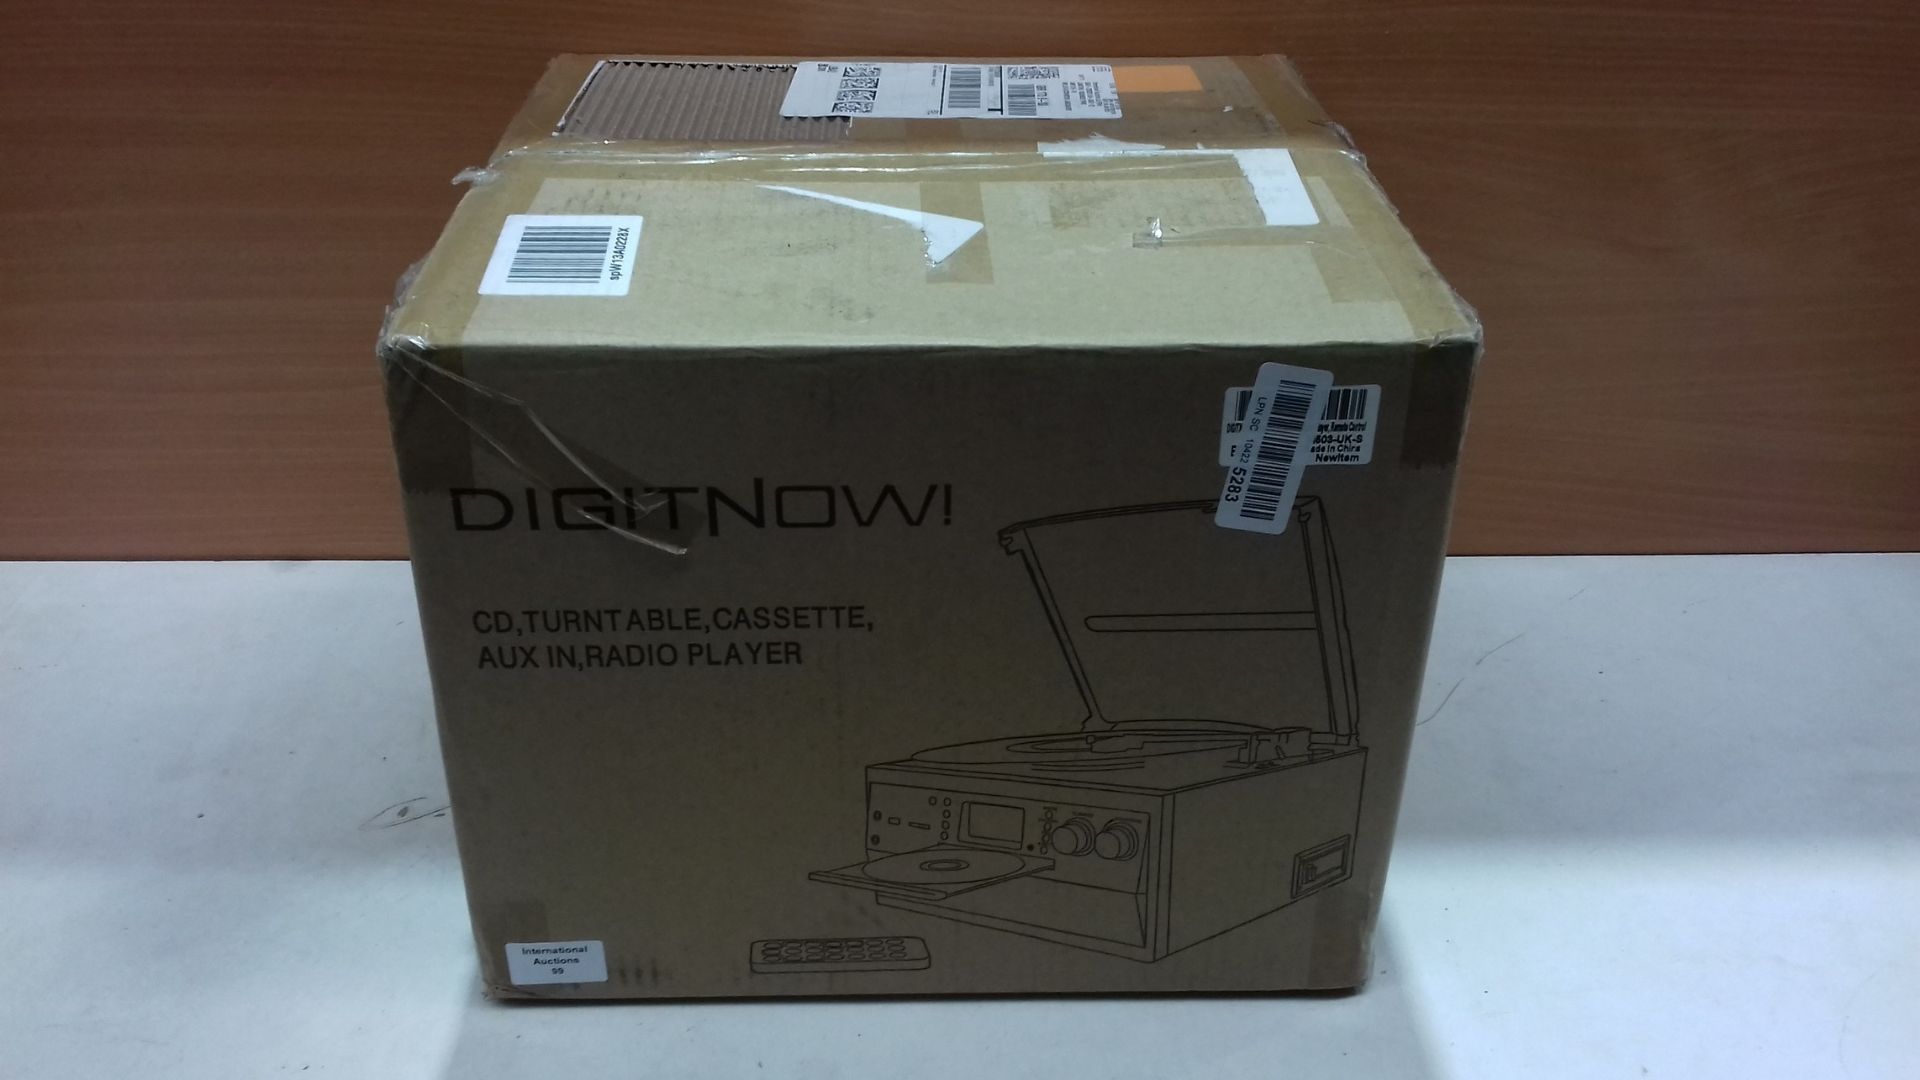 RRP £119.99 DIGITNOW! Bluetooth Vinyl Record Player Turntable - Image 2 of 2